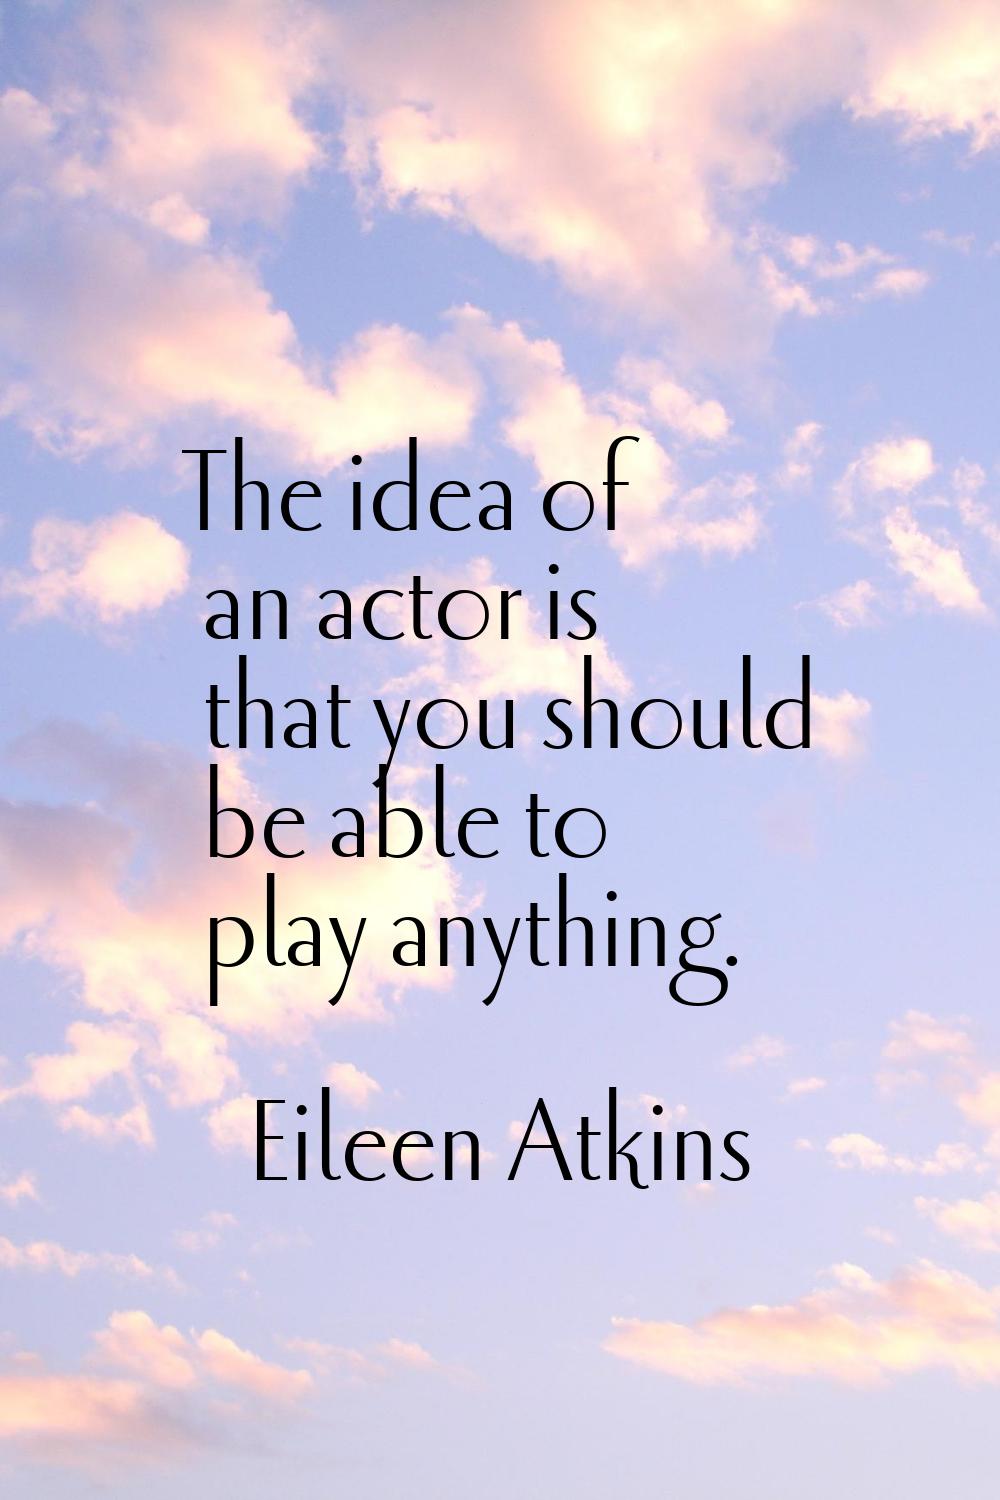 The idea of an actor is that you should be able to play anything.